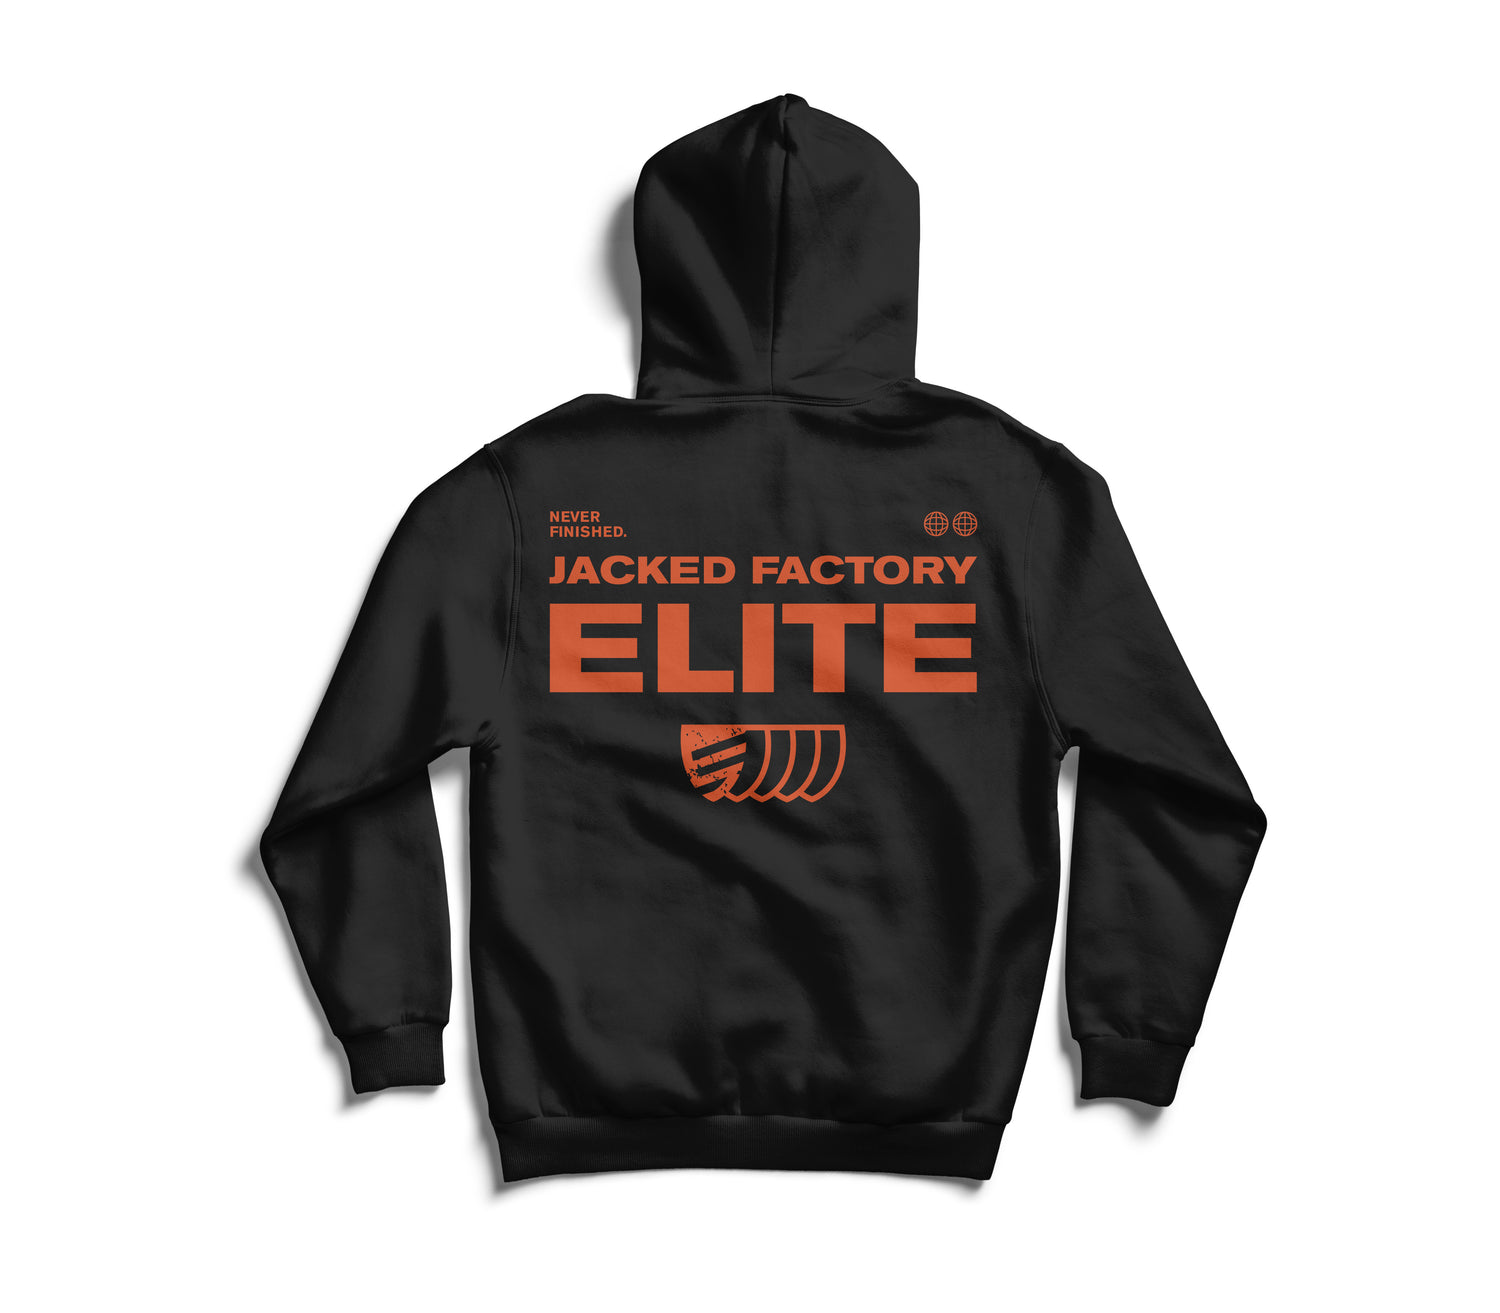 Back of black Jacked Factory Elite hoodie with red text and logo